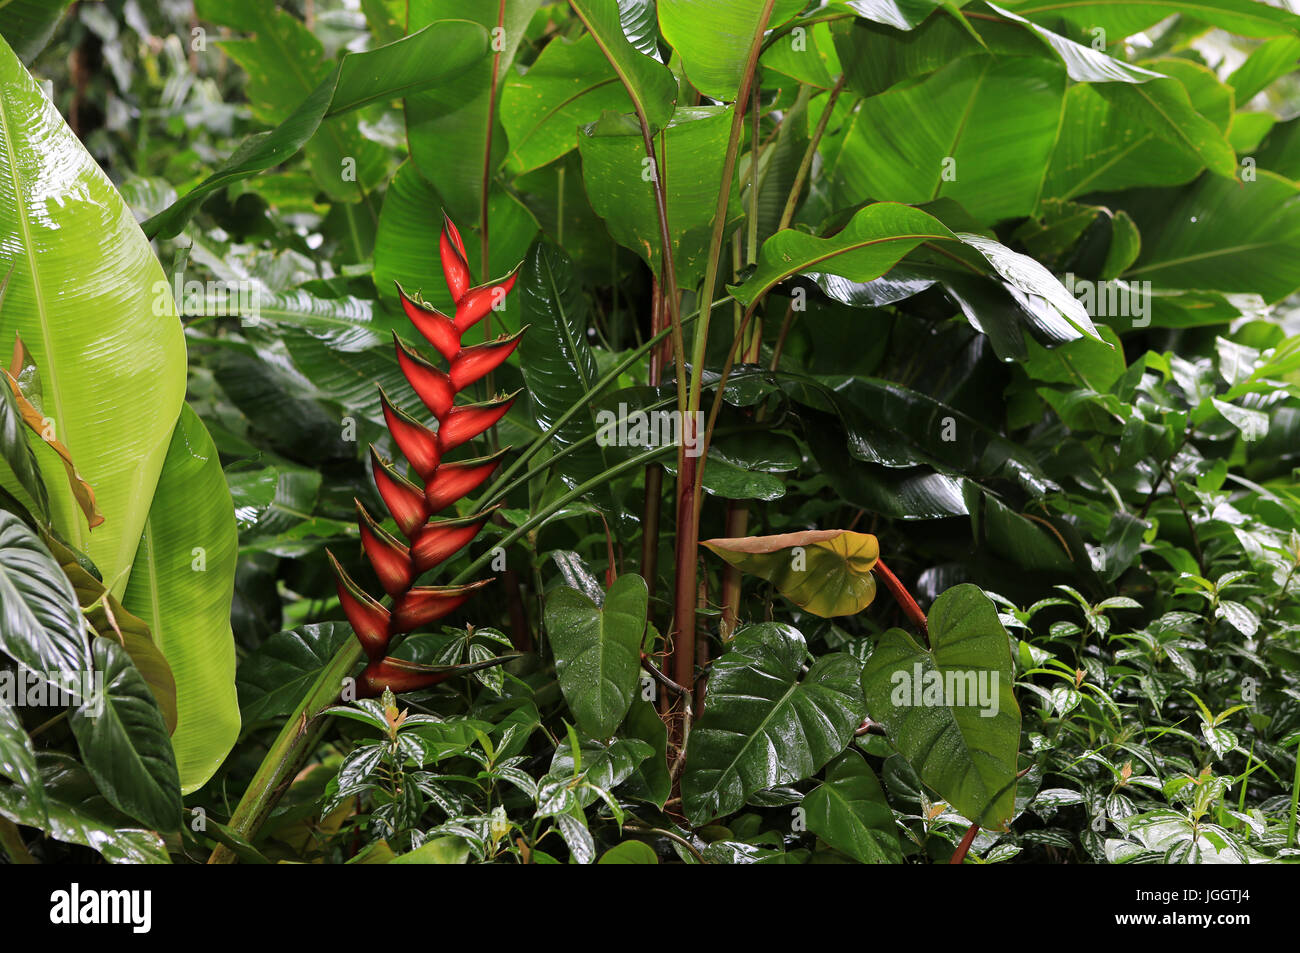 Heliconia flower in the rainforest, Hawaii Stock Photo